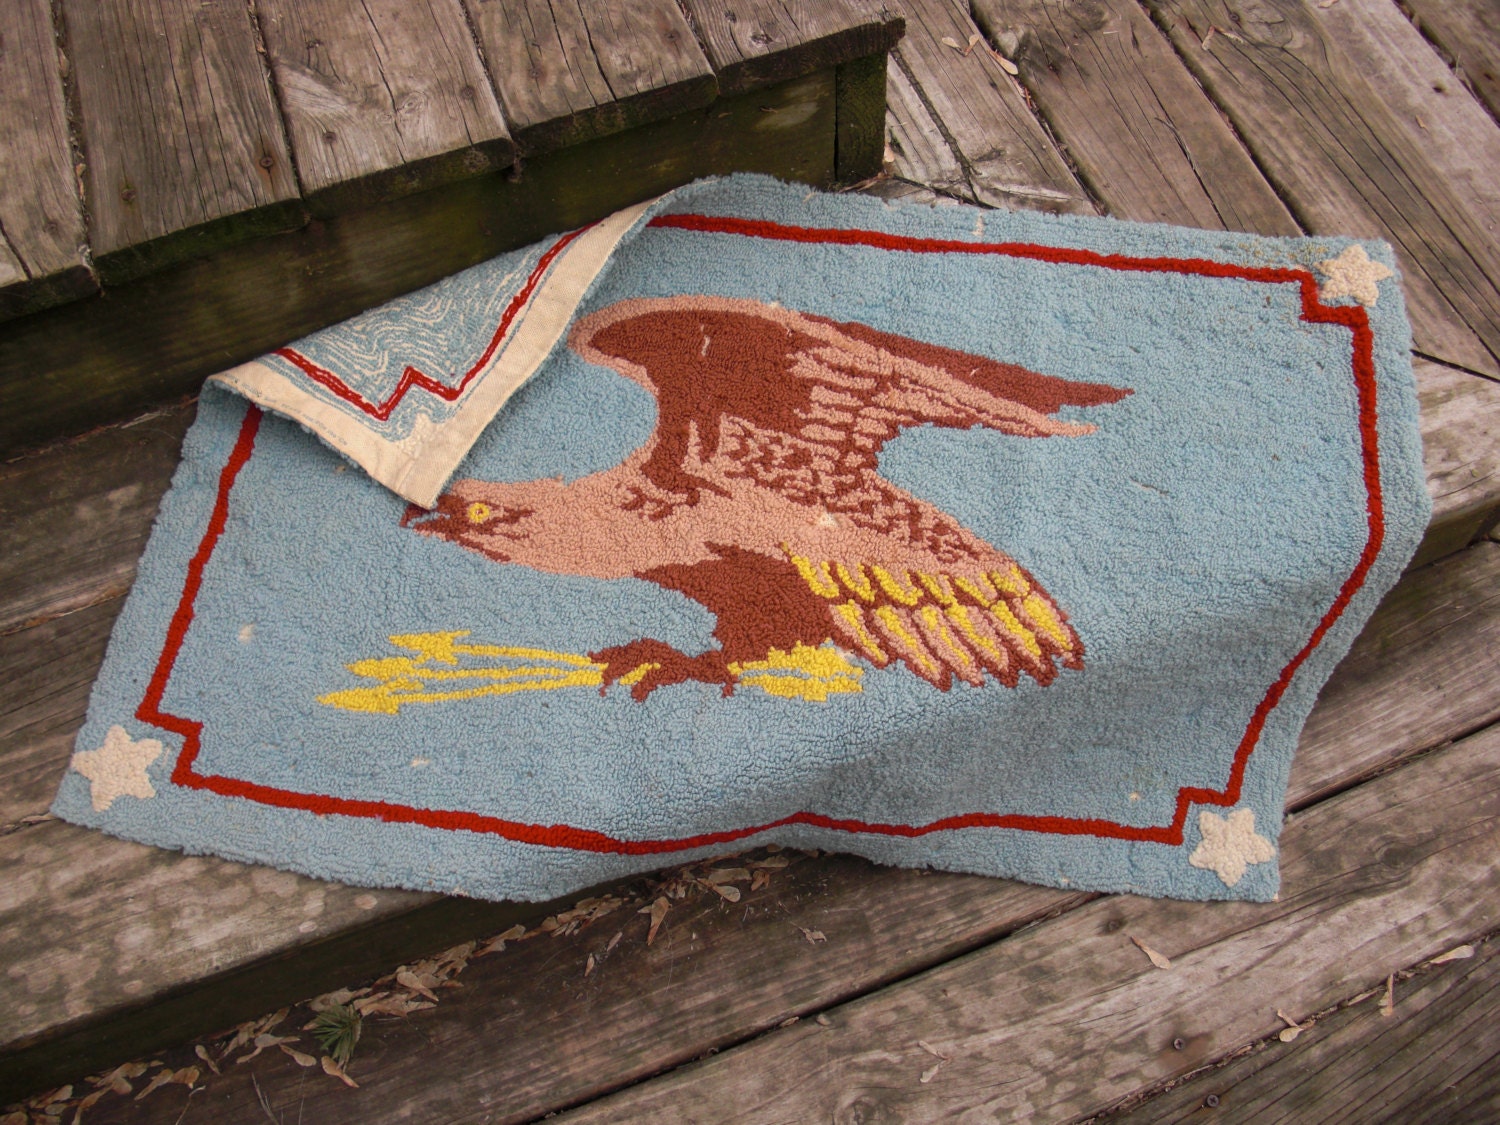 Very Vintage Rug Vintage Wall Decor by NorthboundSalvage on Etsy